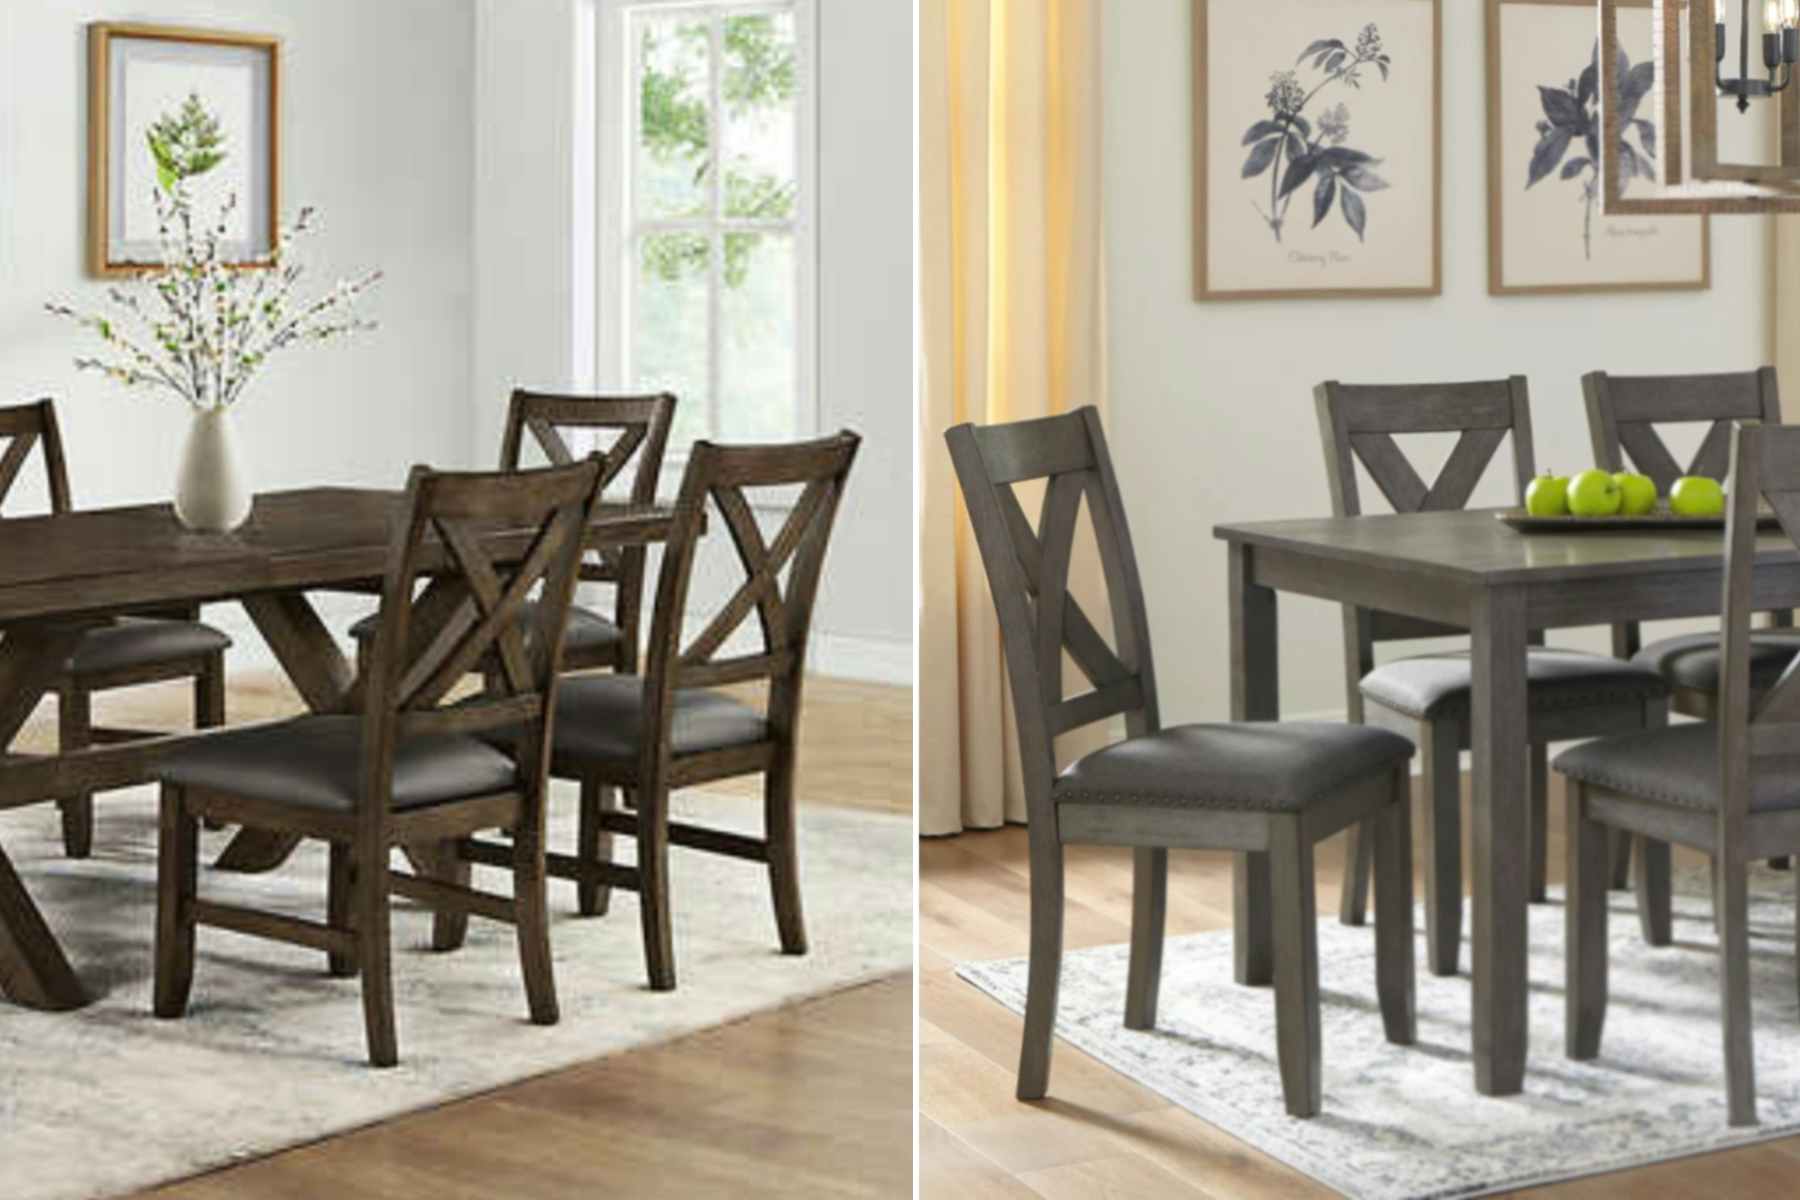 two images of tables and chair